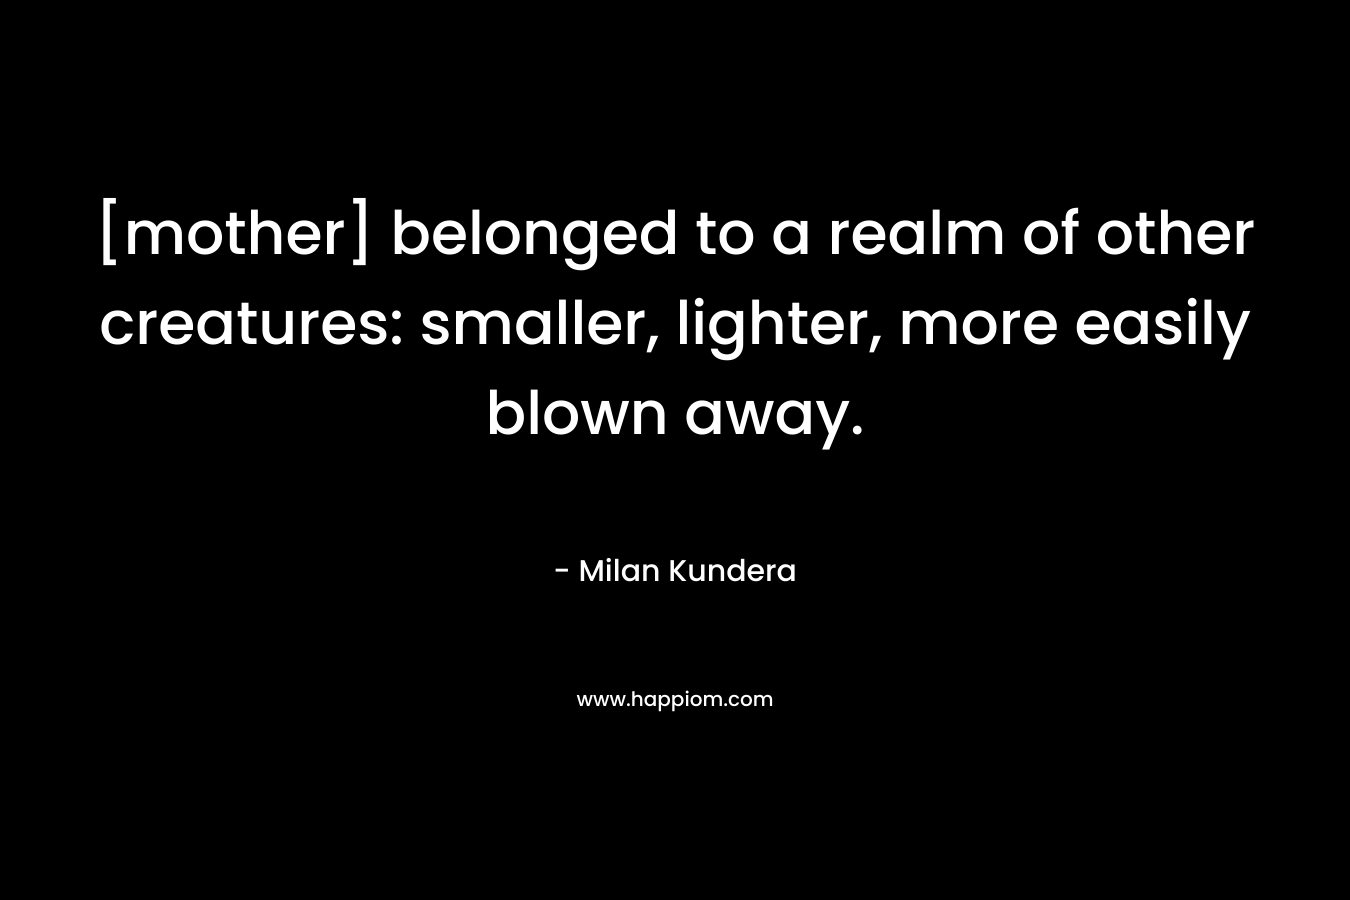 [mother] belonged to a realm of other creatures: smaller, lighter, more easily blown away. – Milan Kundera